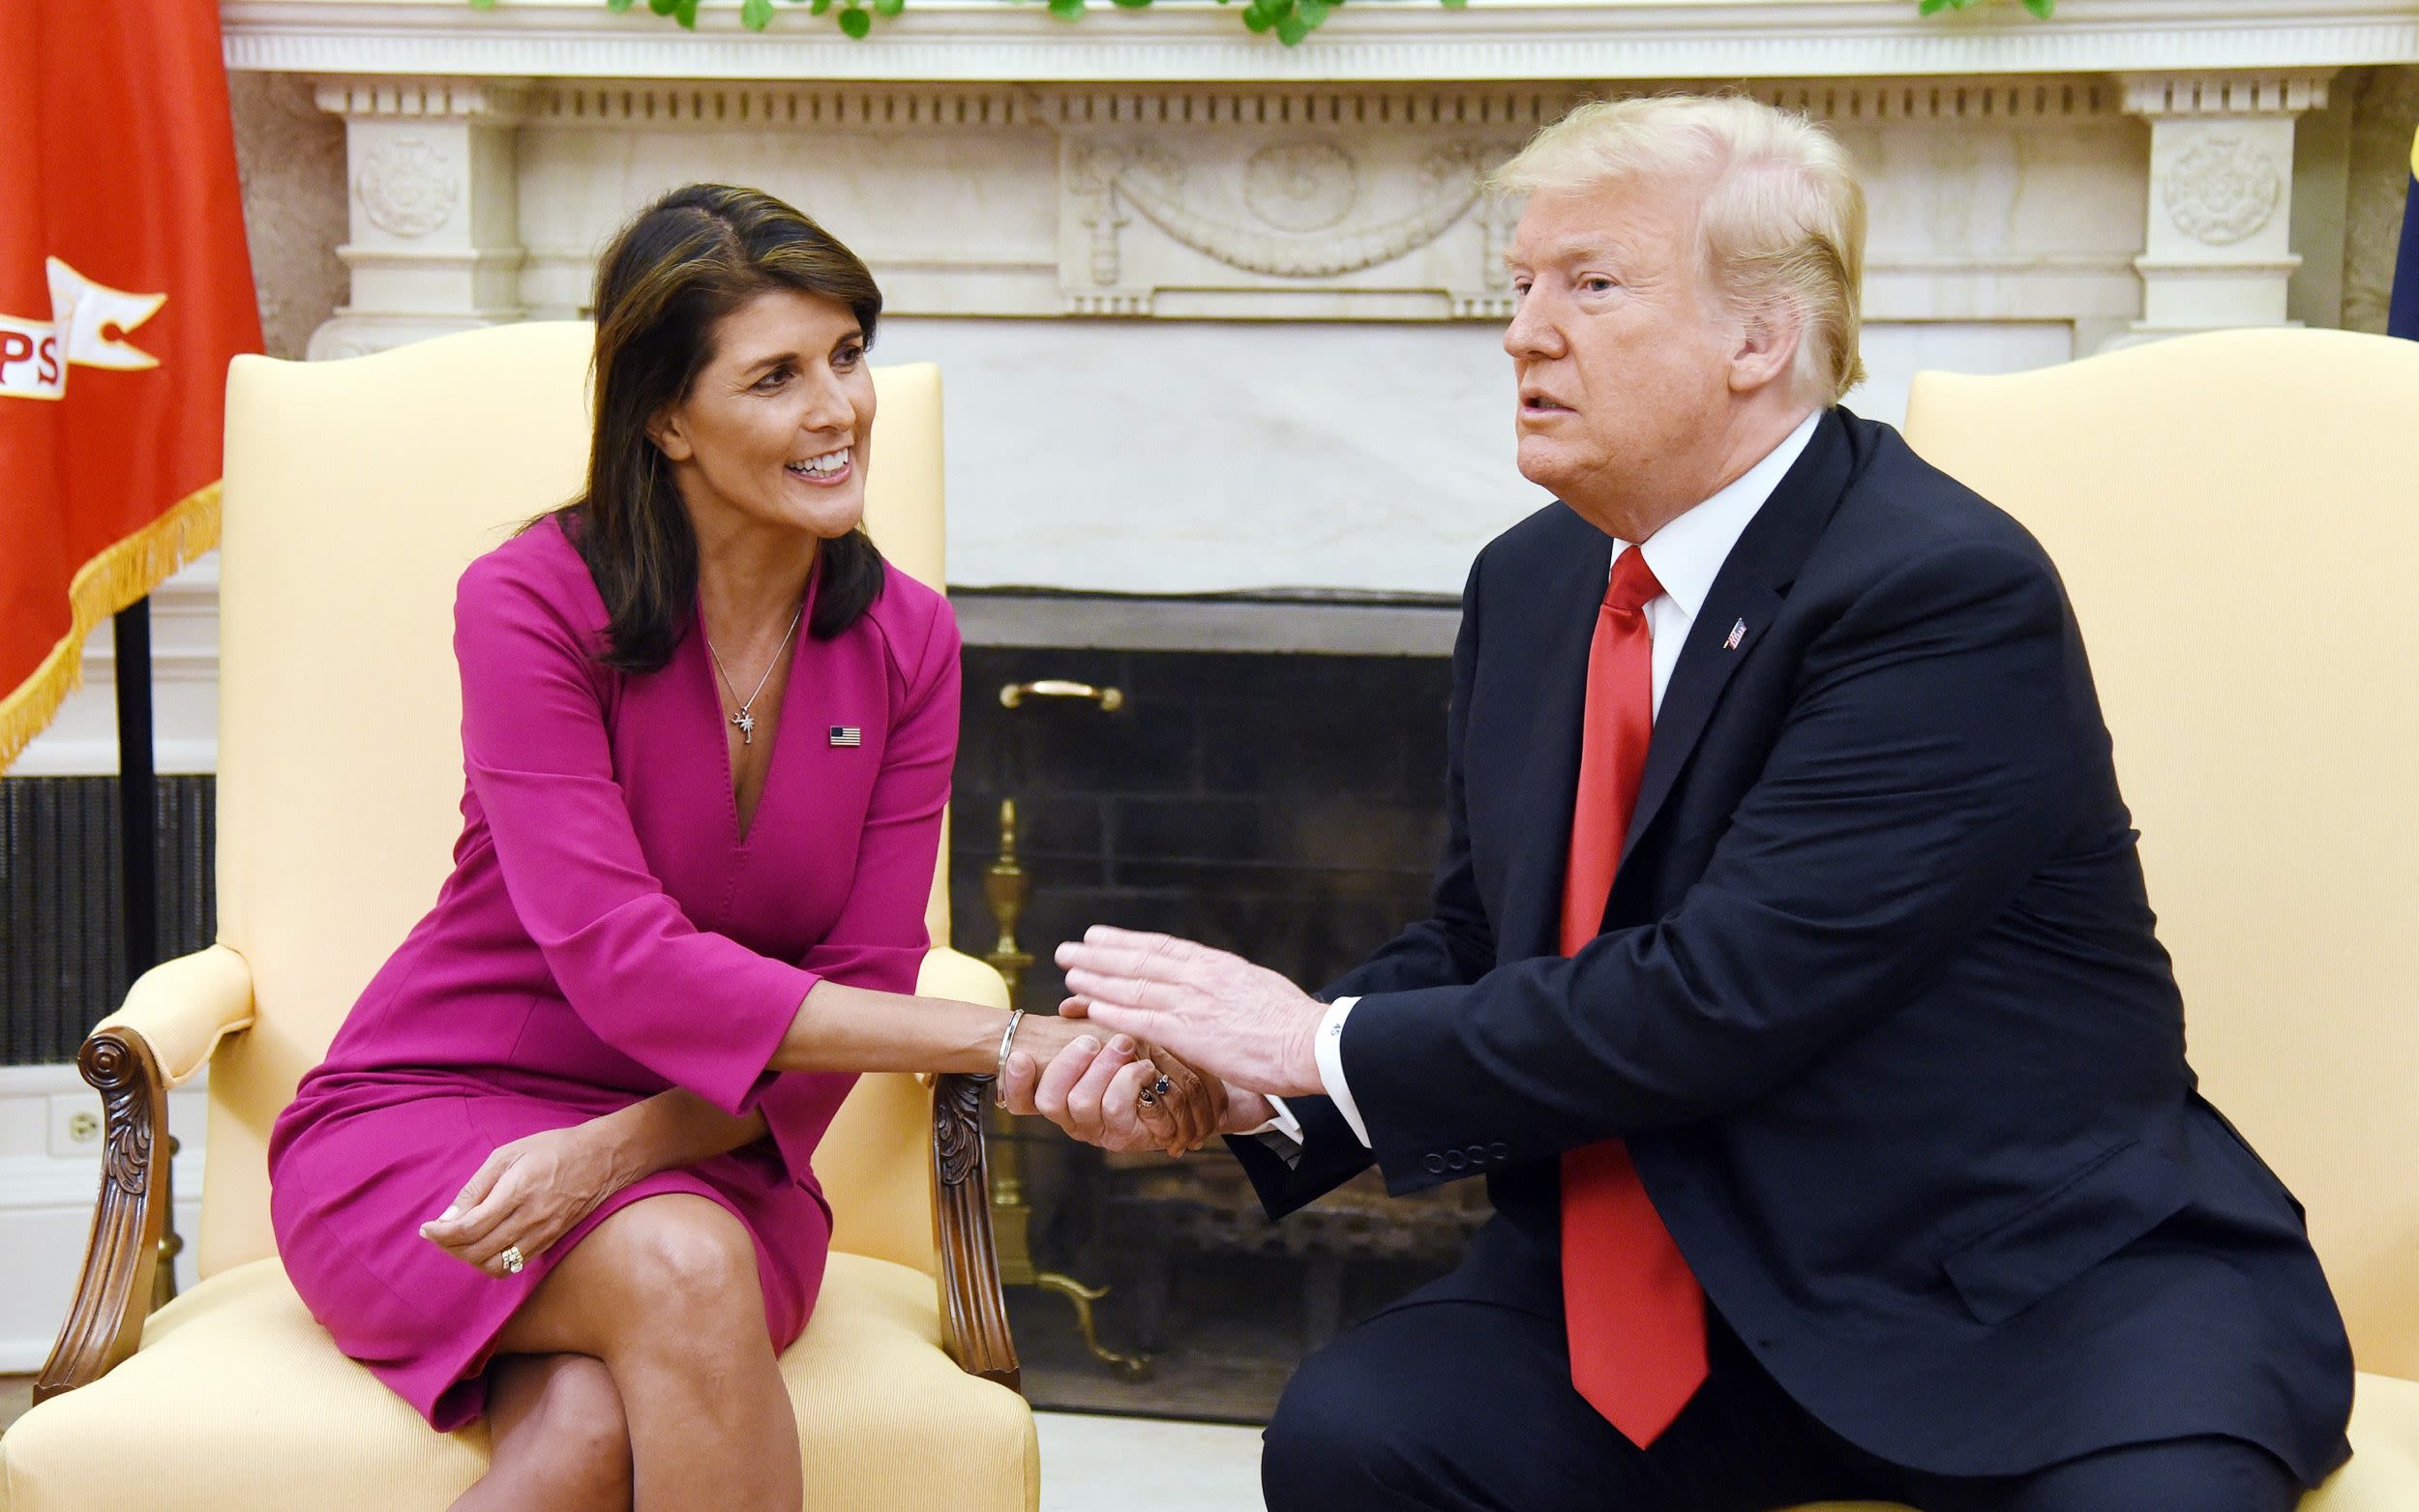 Nikki Haley will be on my team in some form if I win, says Trump